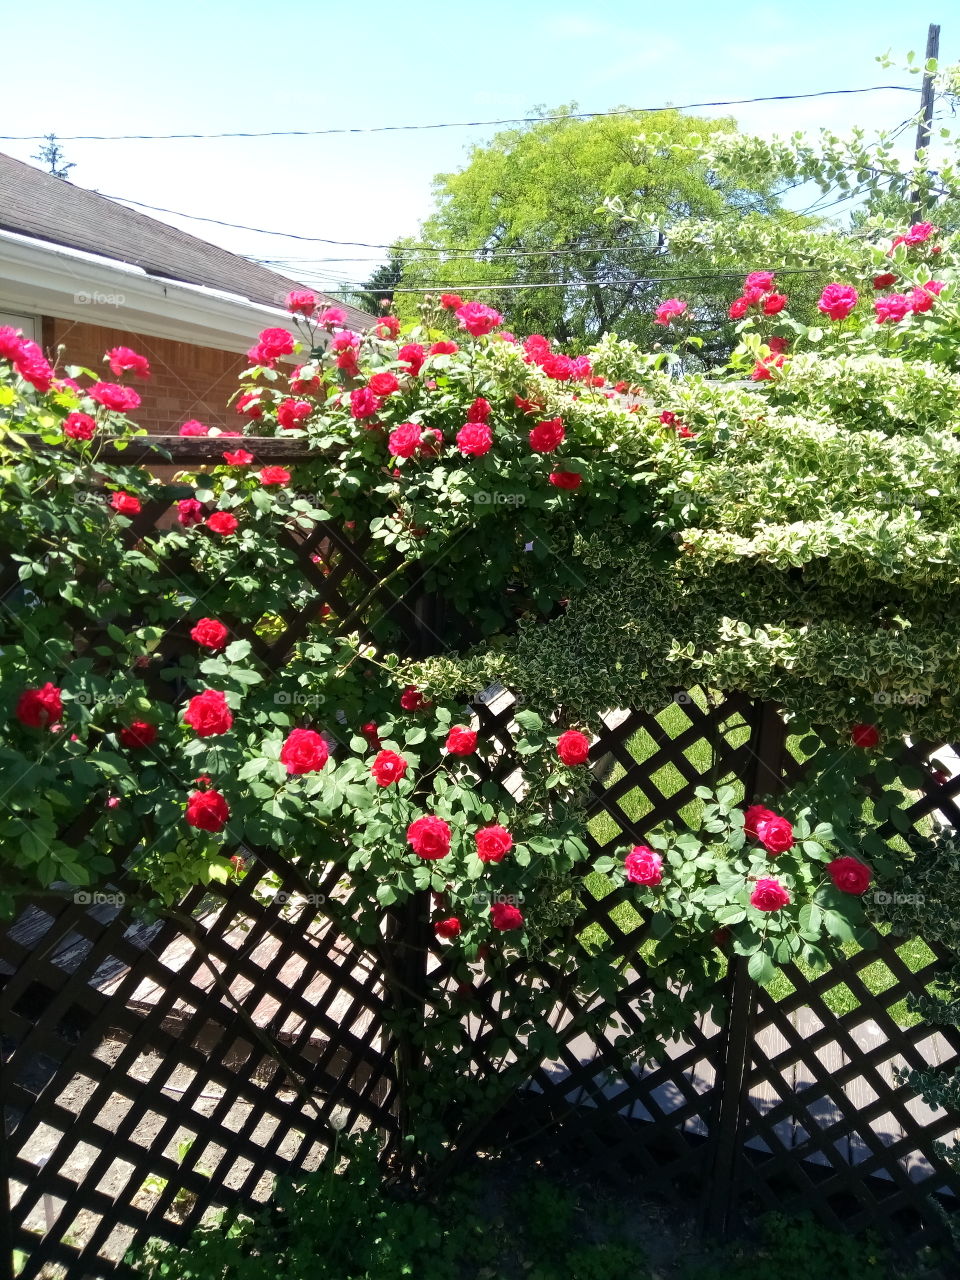 My Red Rose's